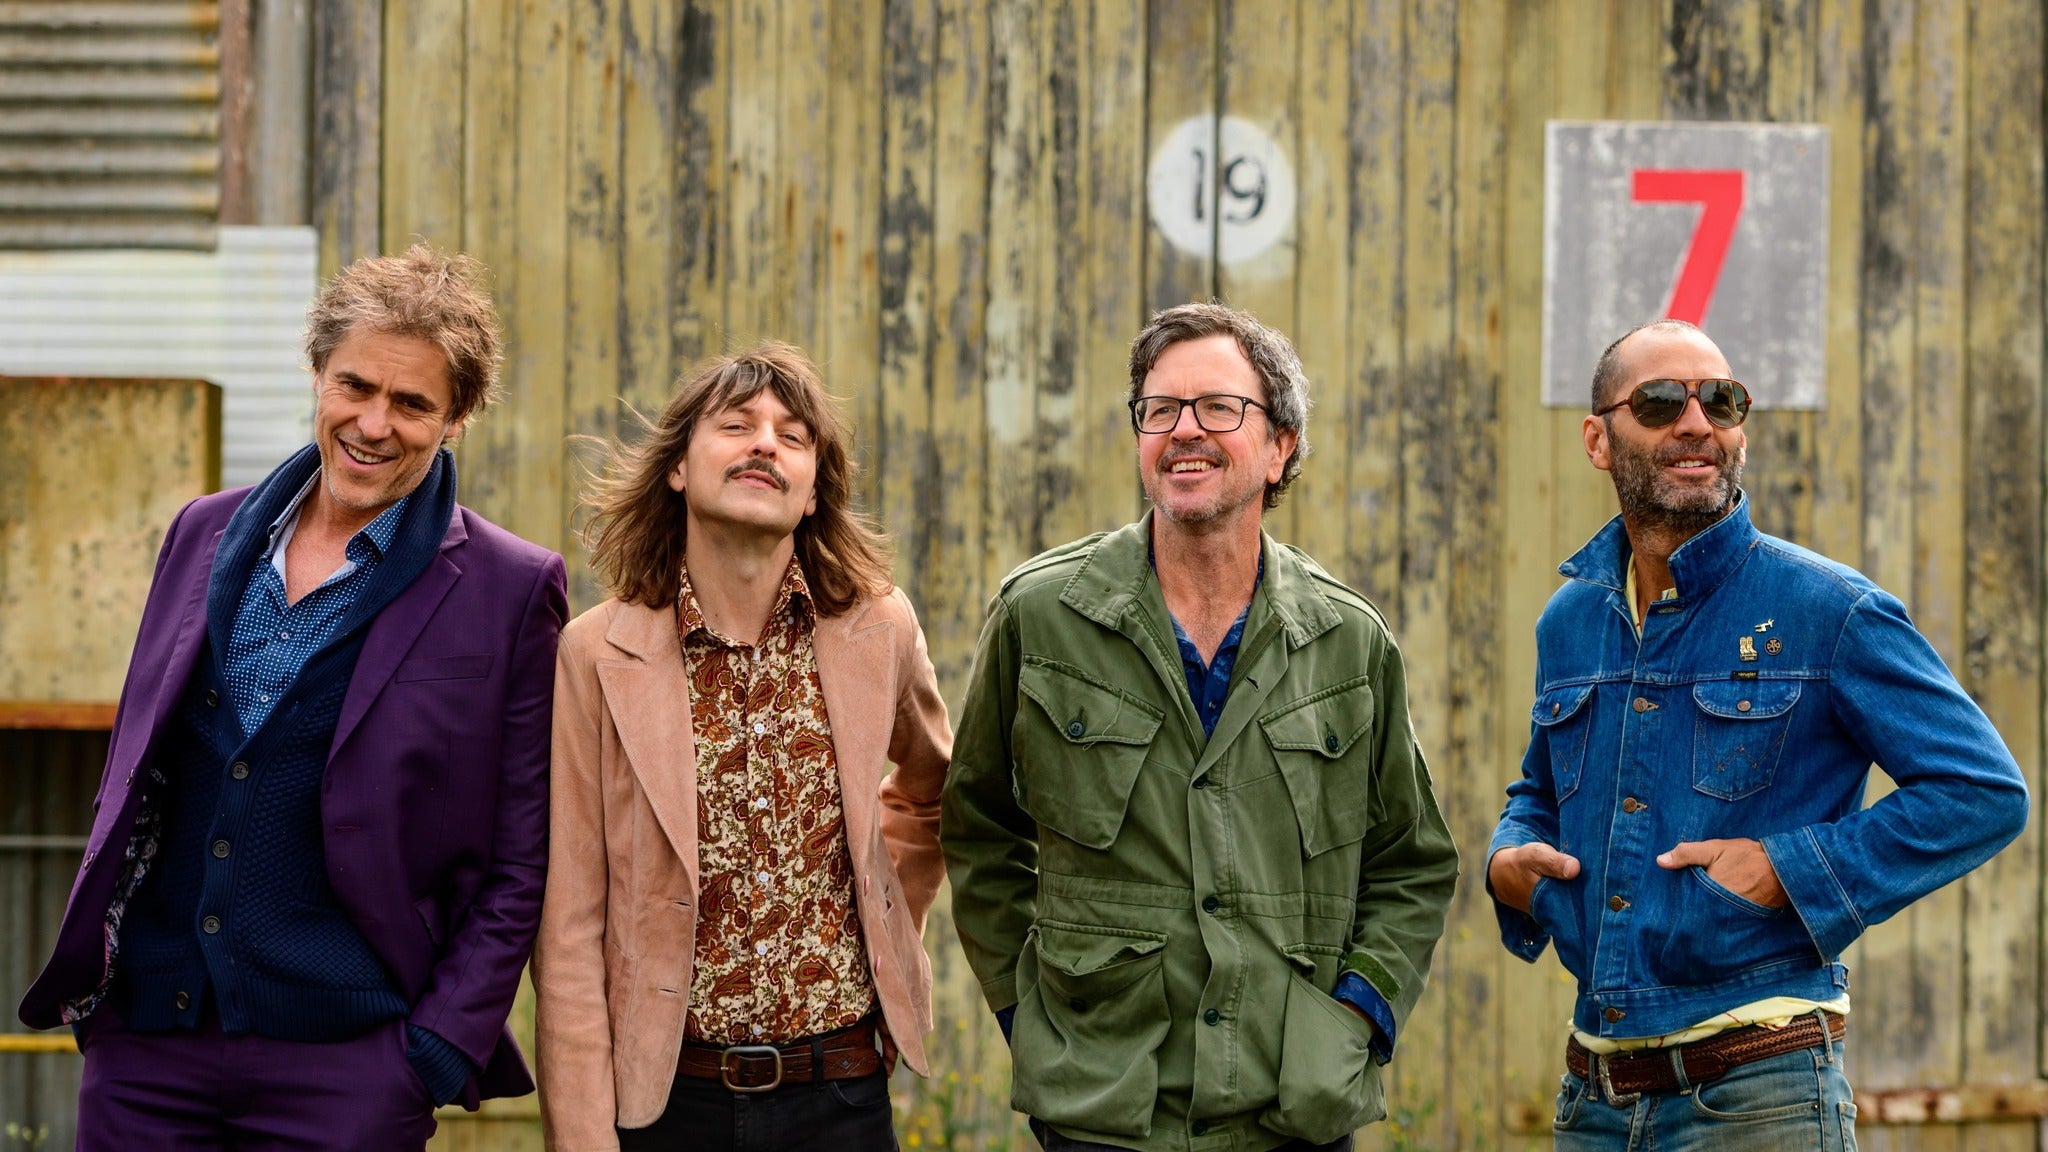 Image used with permission from Ticketmaster | The Whitlams - Gaffage And Clink 2022 tickets